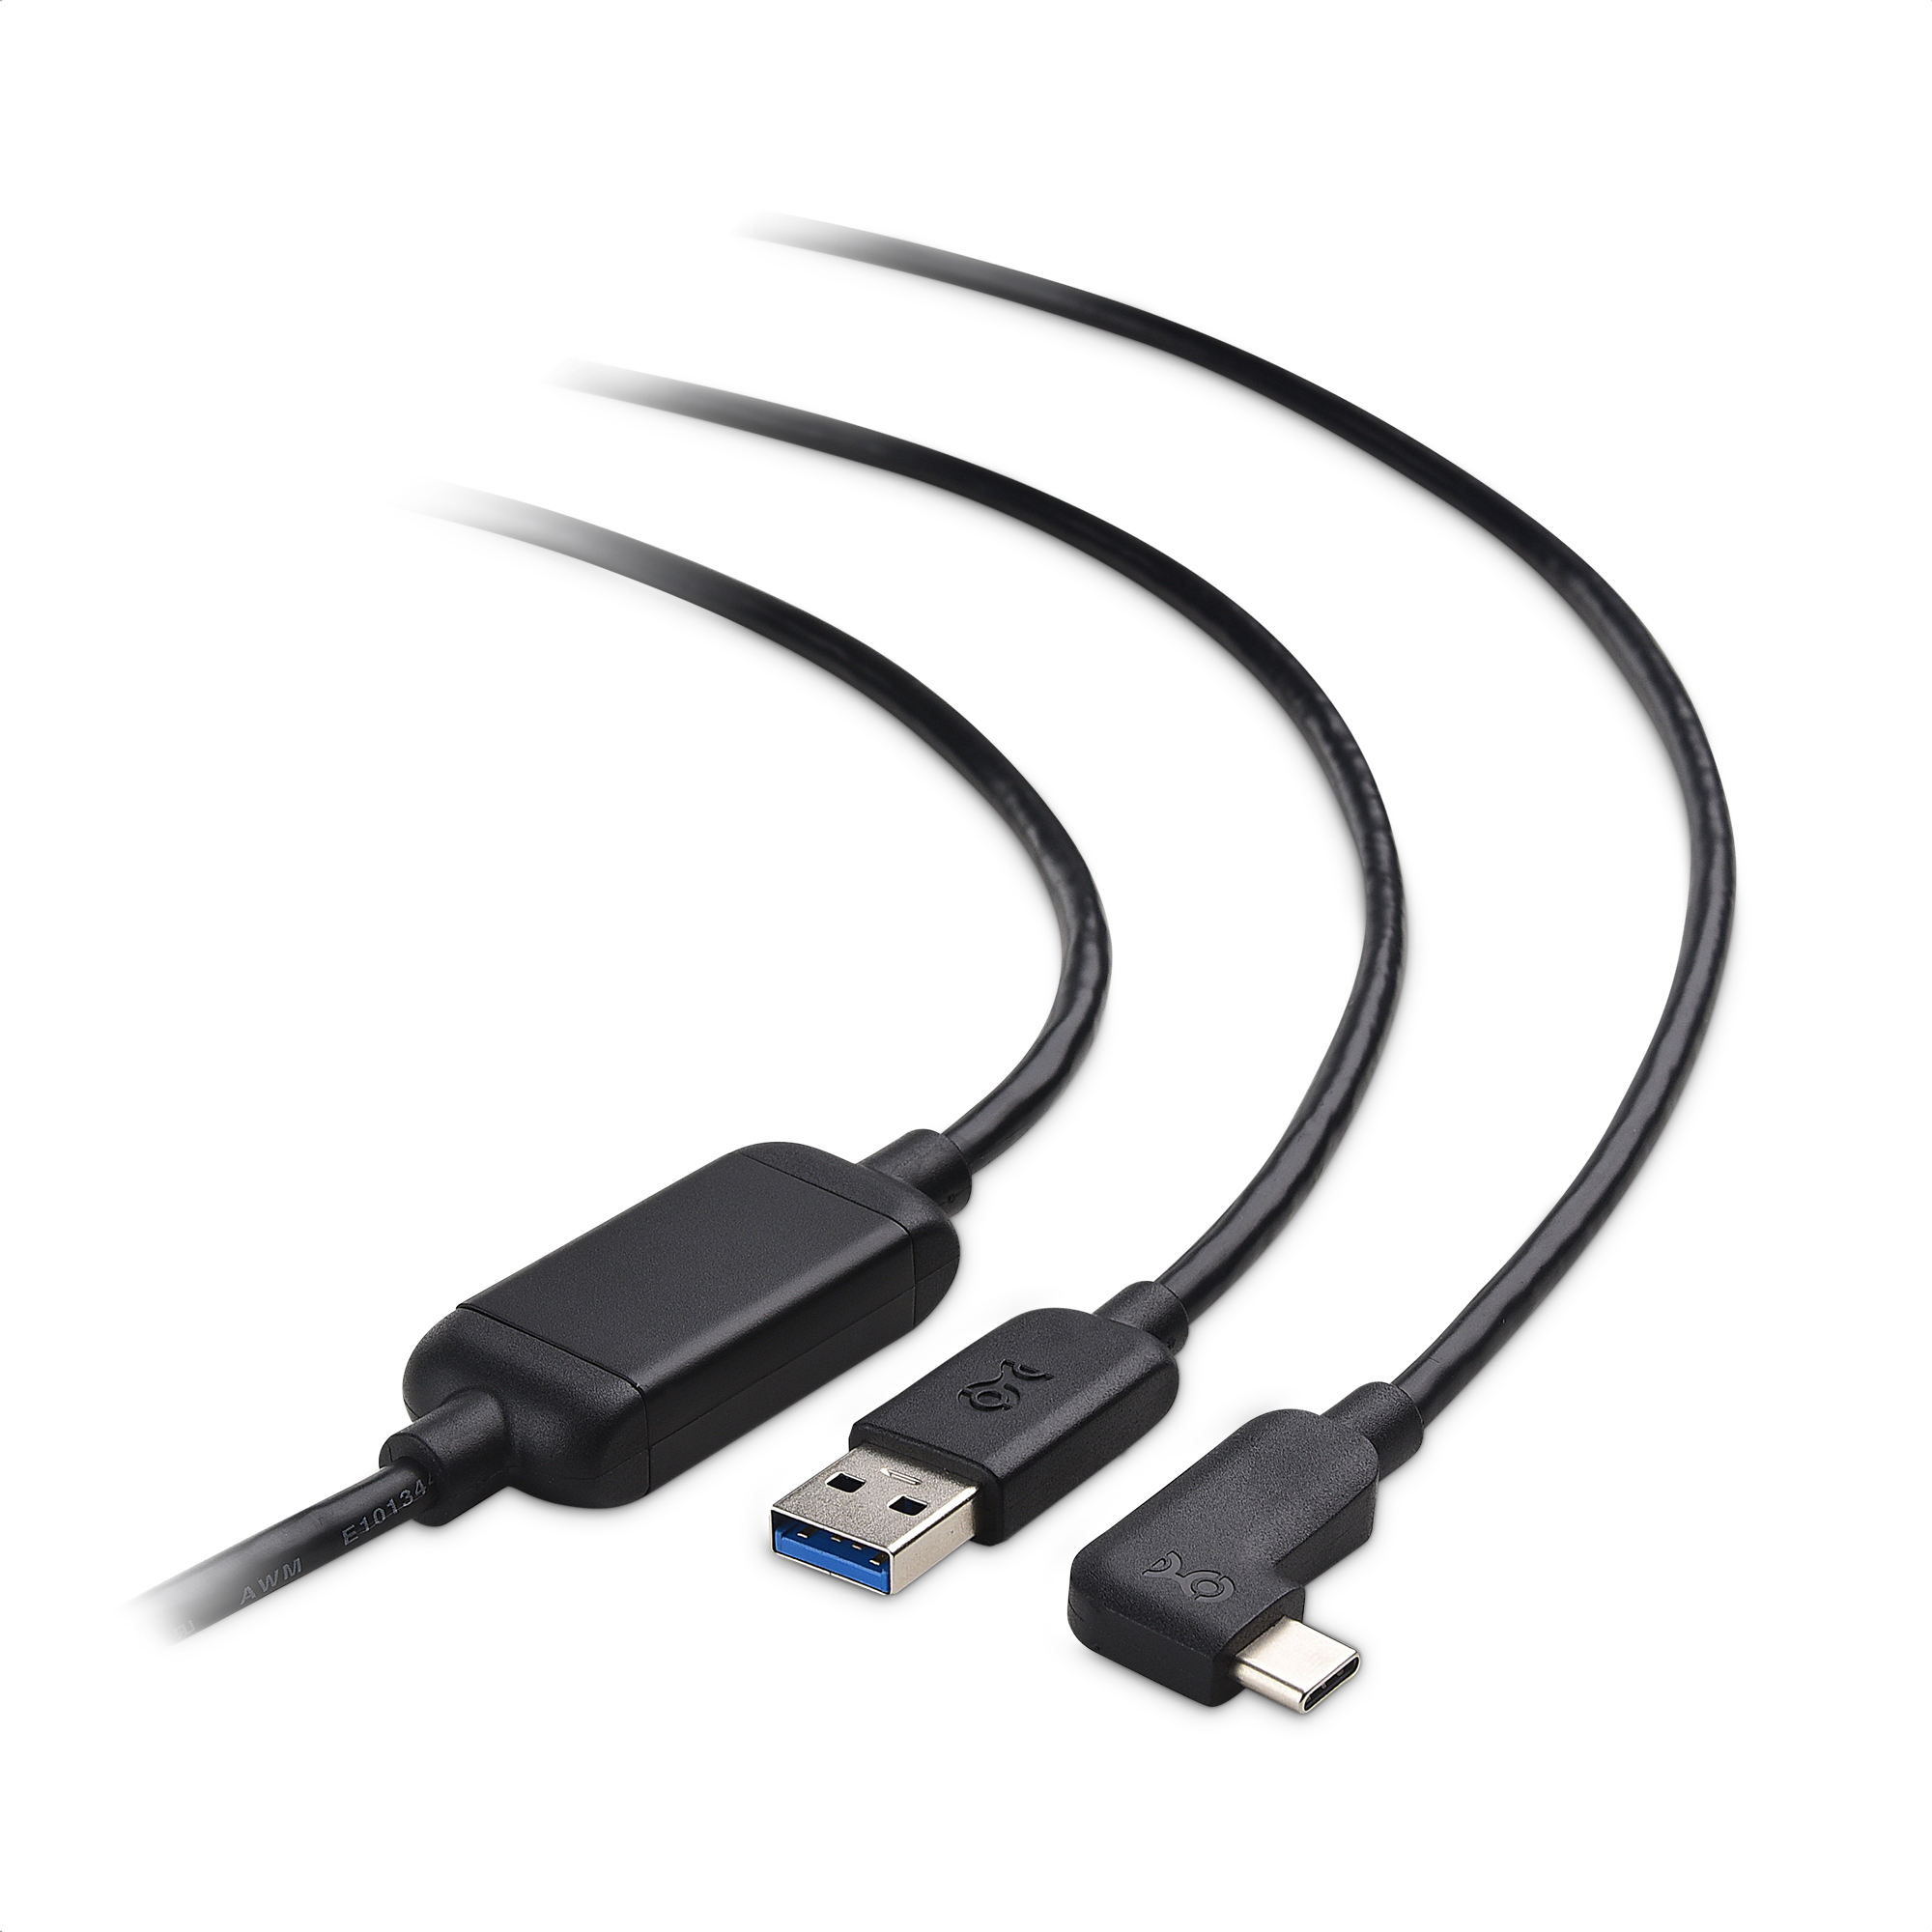  Cable Matters Long USB 3.0 Cable (USB 3 Cable, USB 3.0 A to B  Cable) in Black 15 ft : Electronics